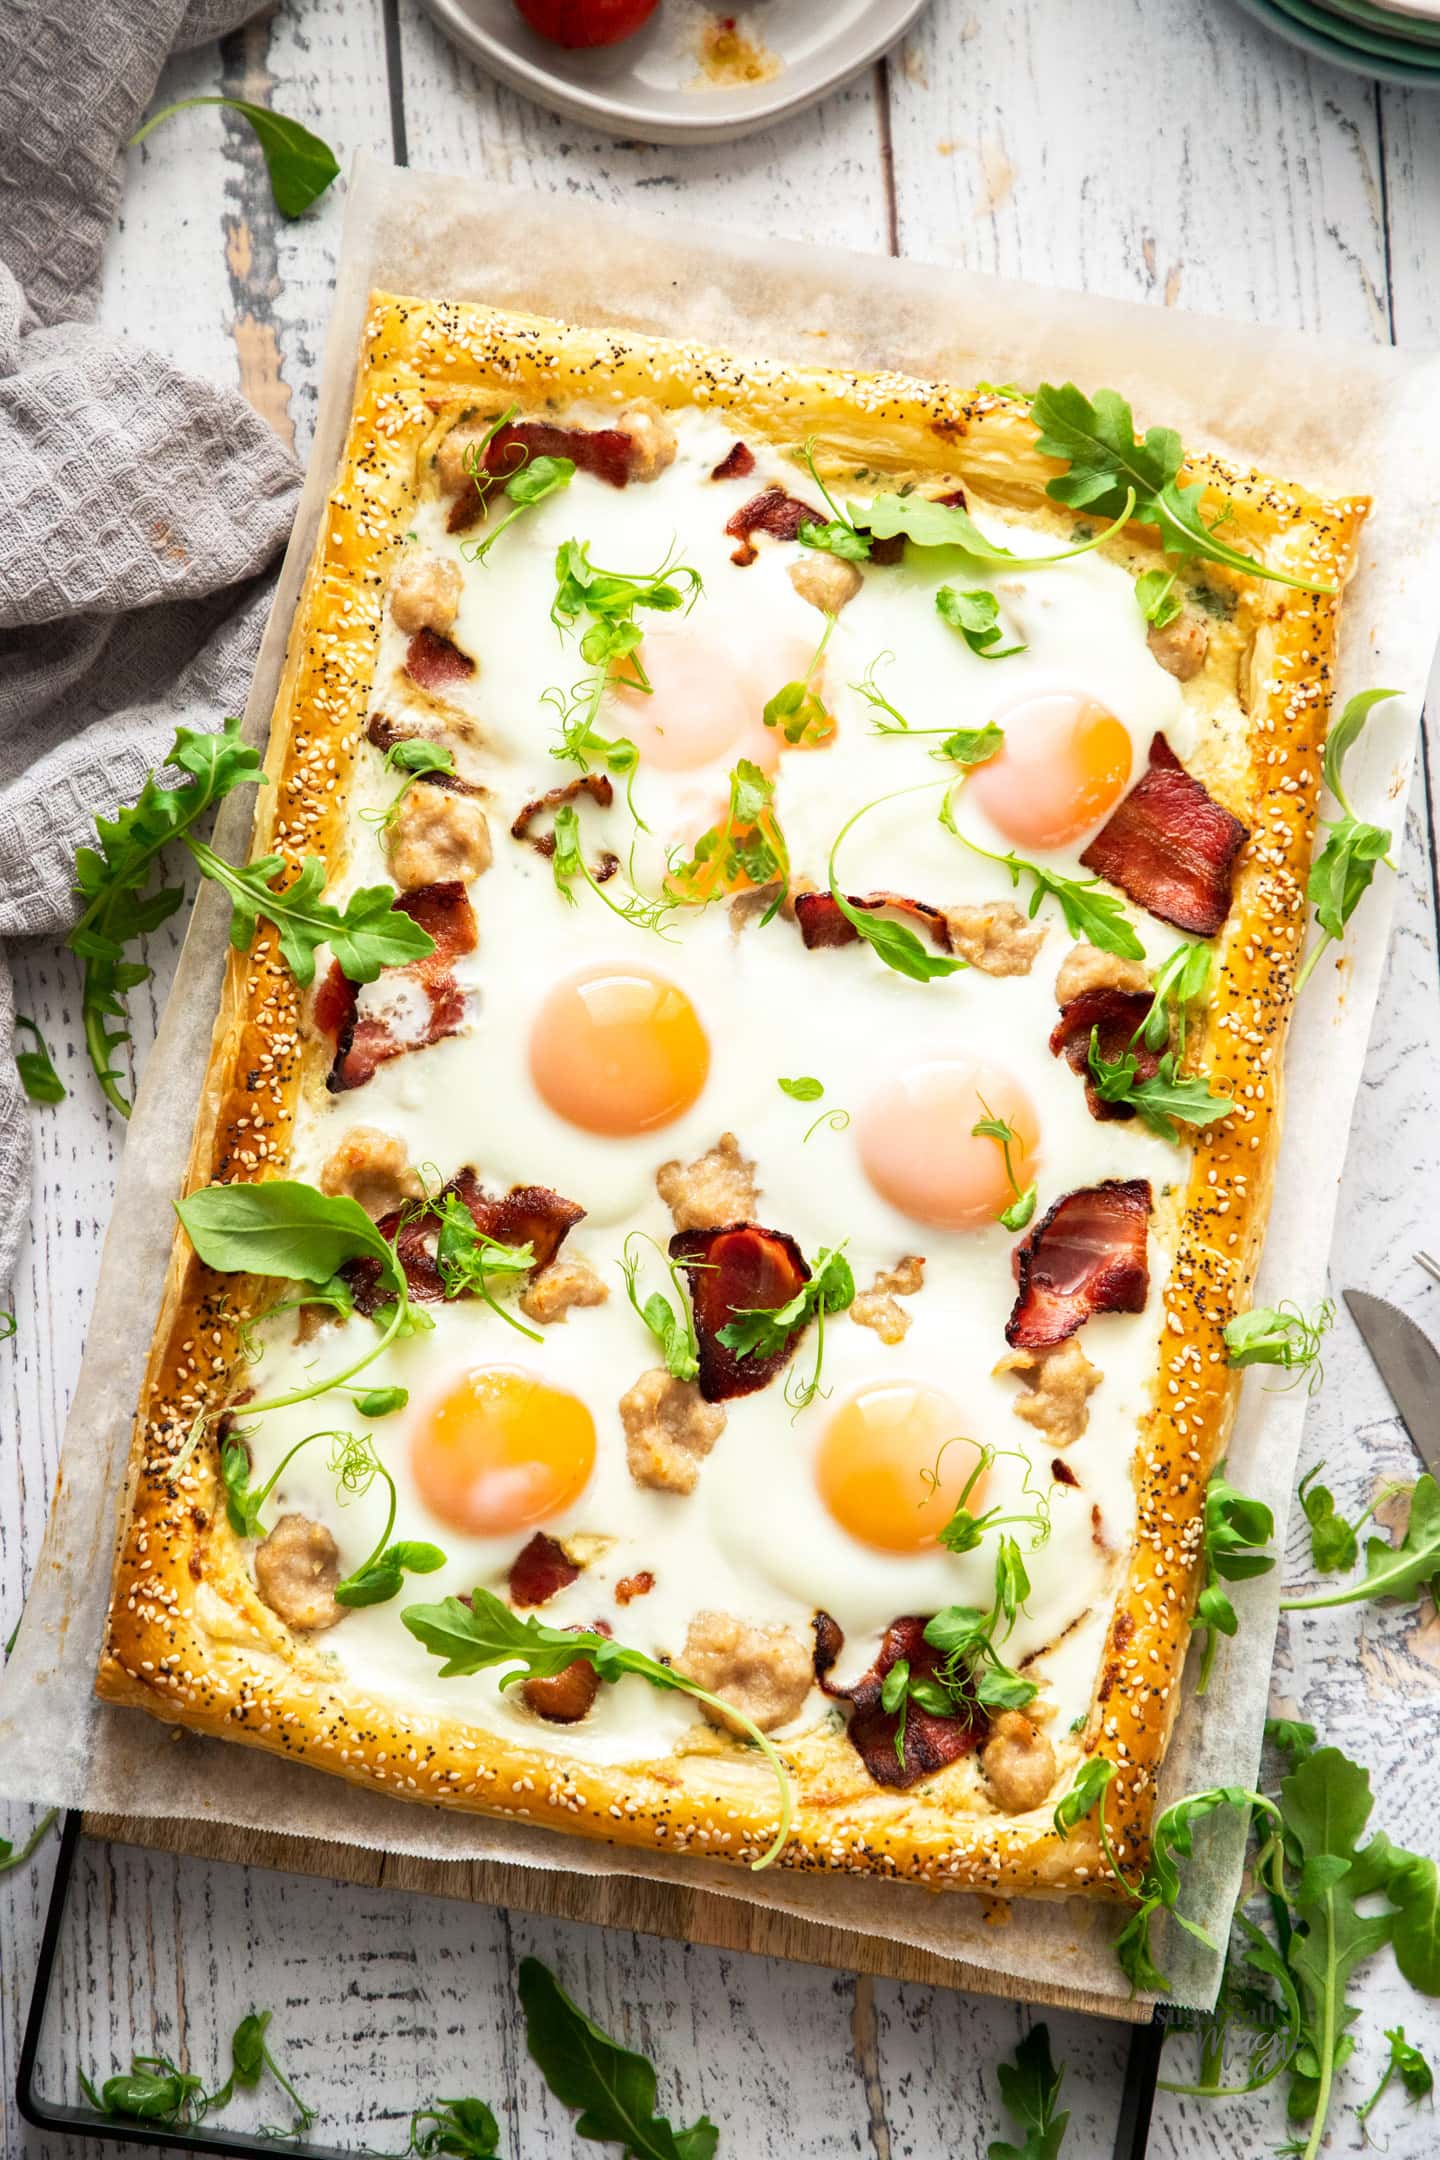 Top down view of a whole breakfast tart, ready to serve.